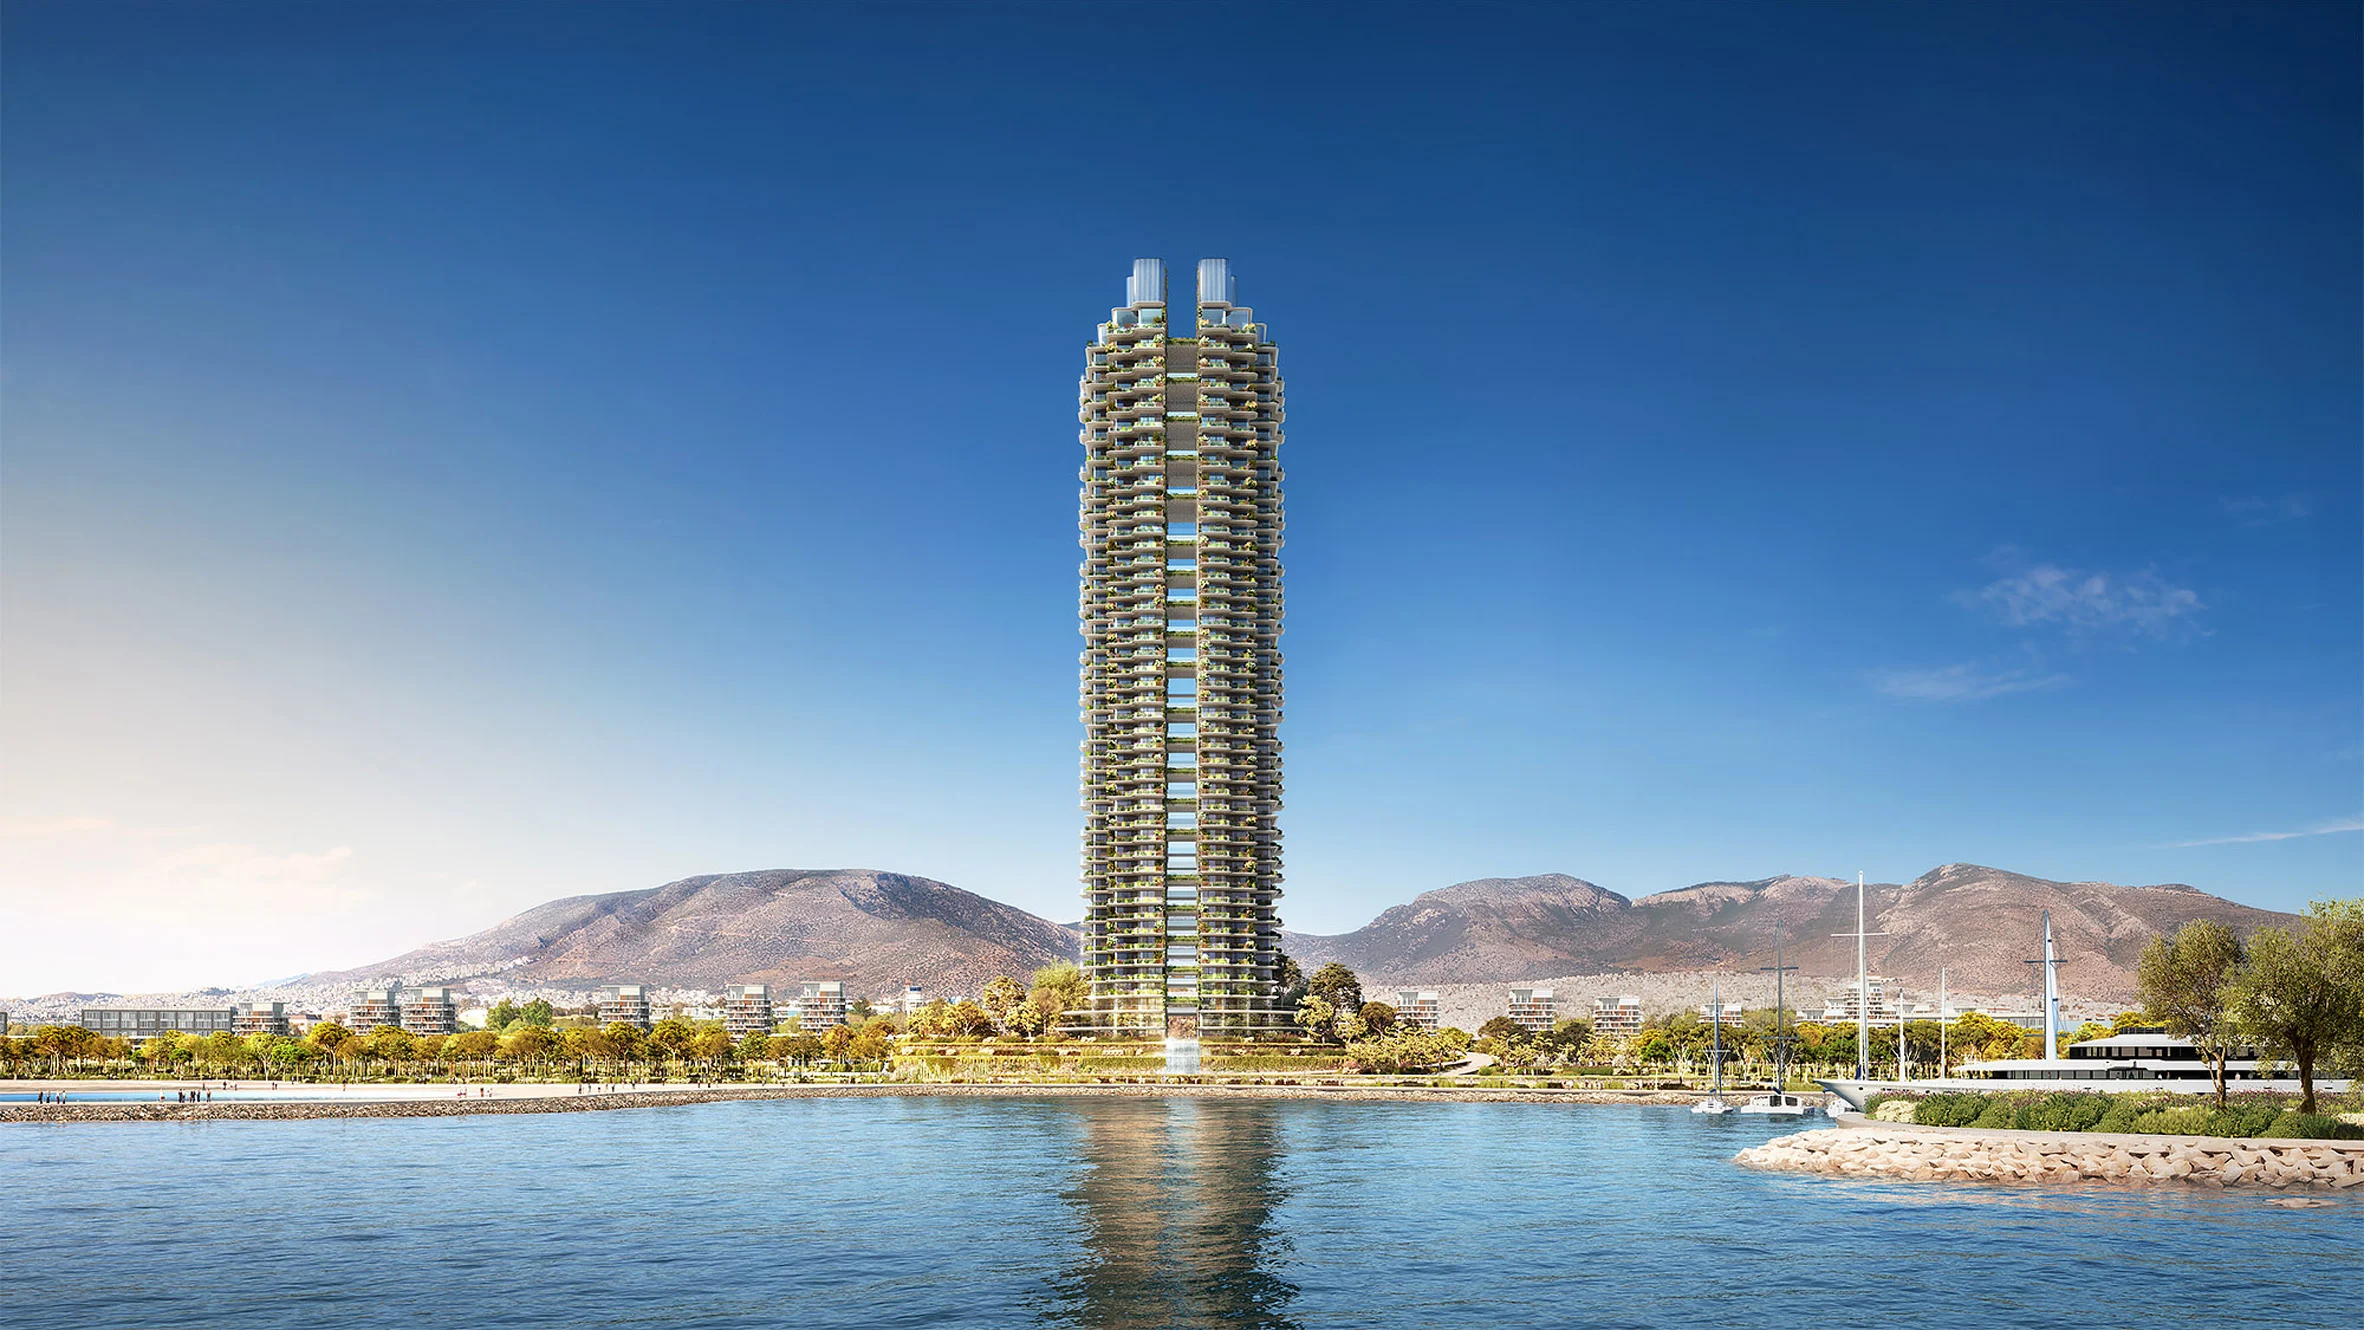 Plans for Greece’s first green skyscraper unveiled